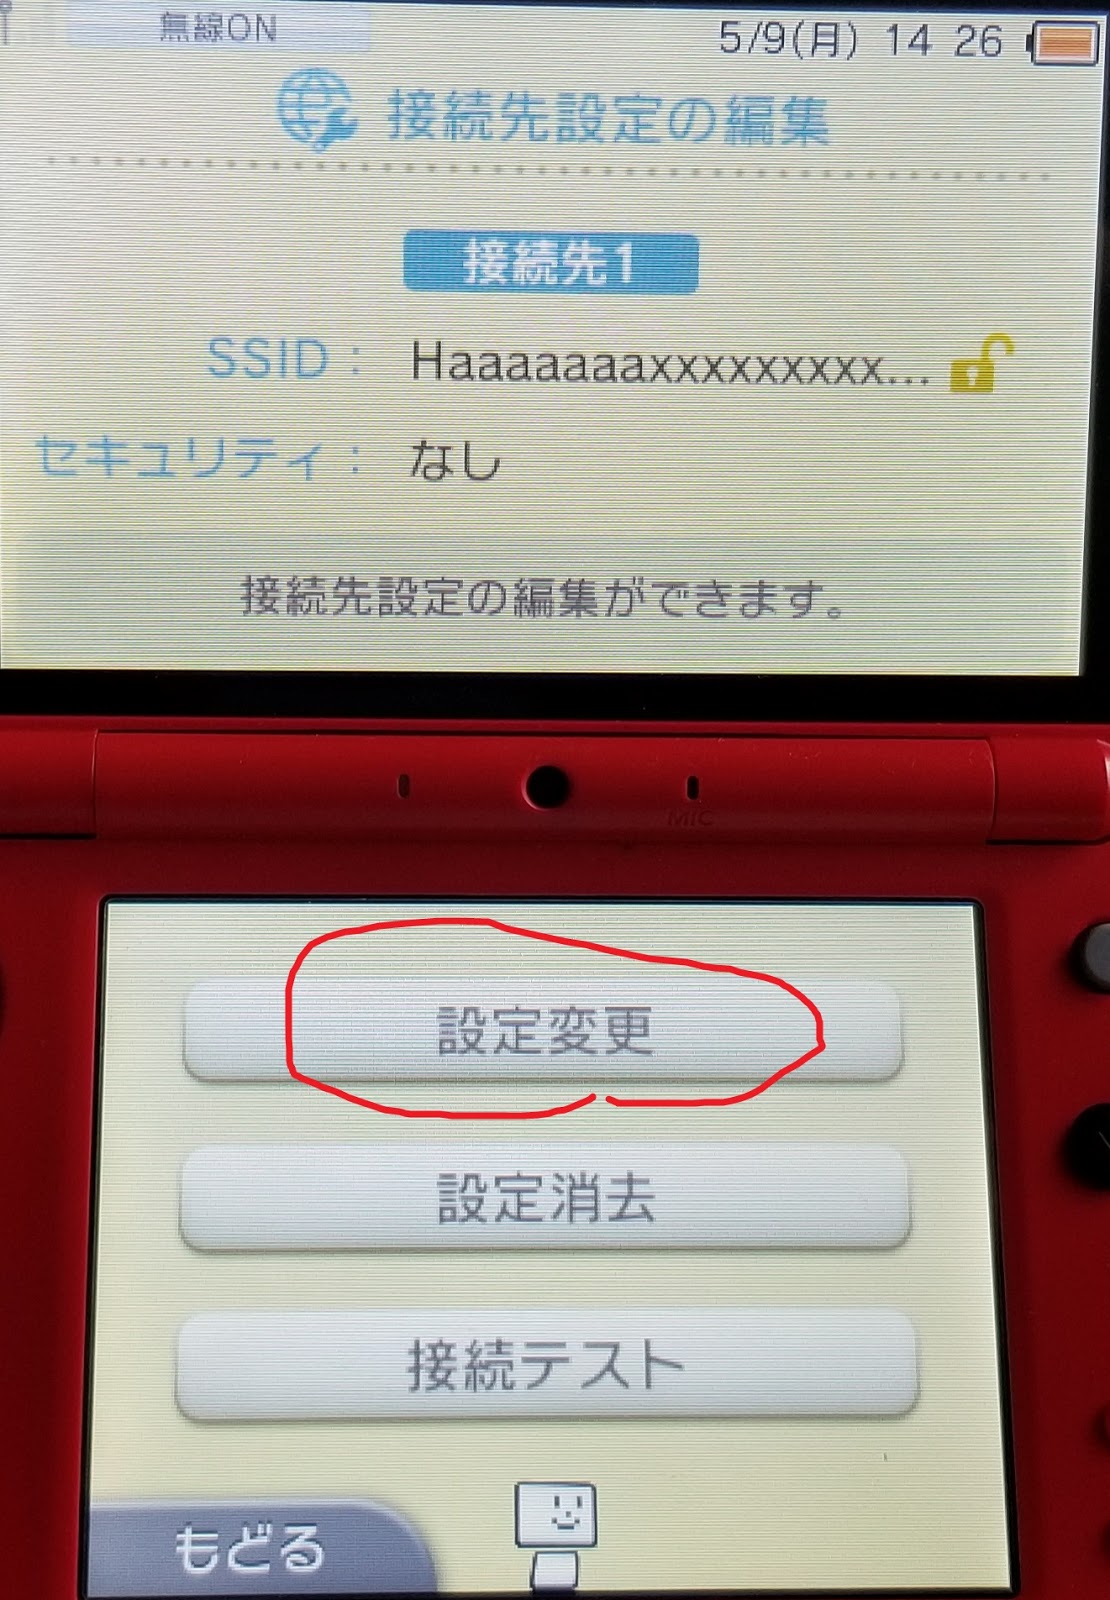 3ds 改造する方法 Bannerbomb3 Unsafe Mode